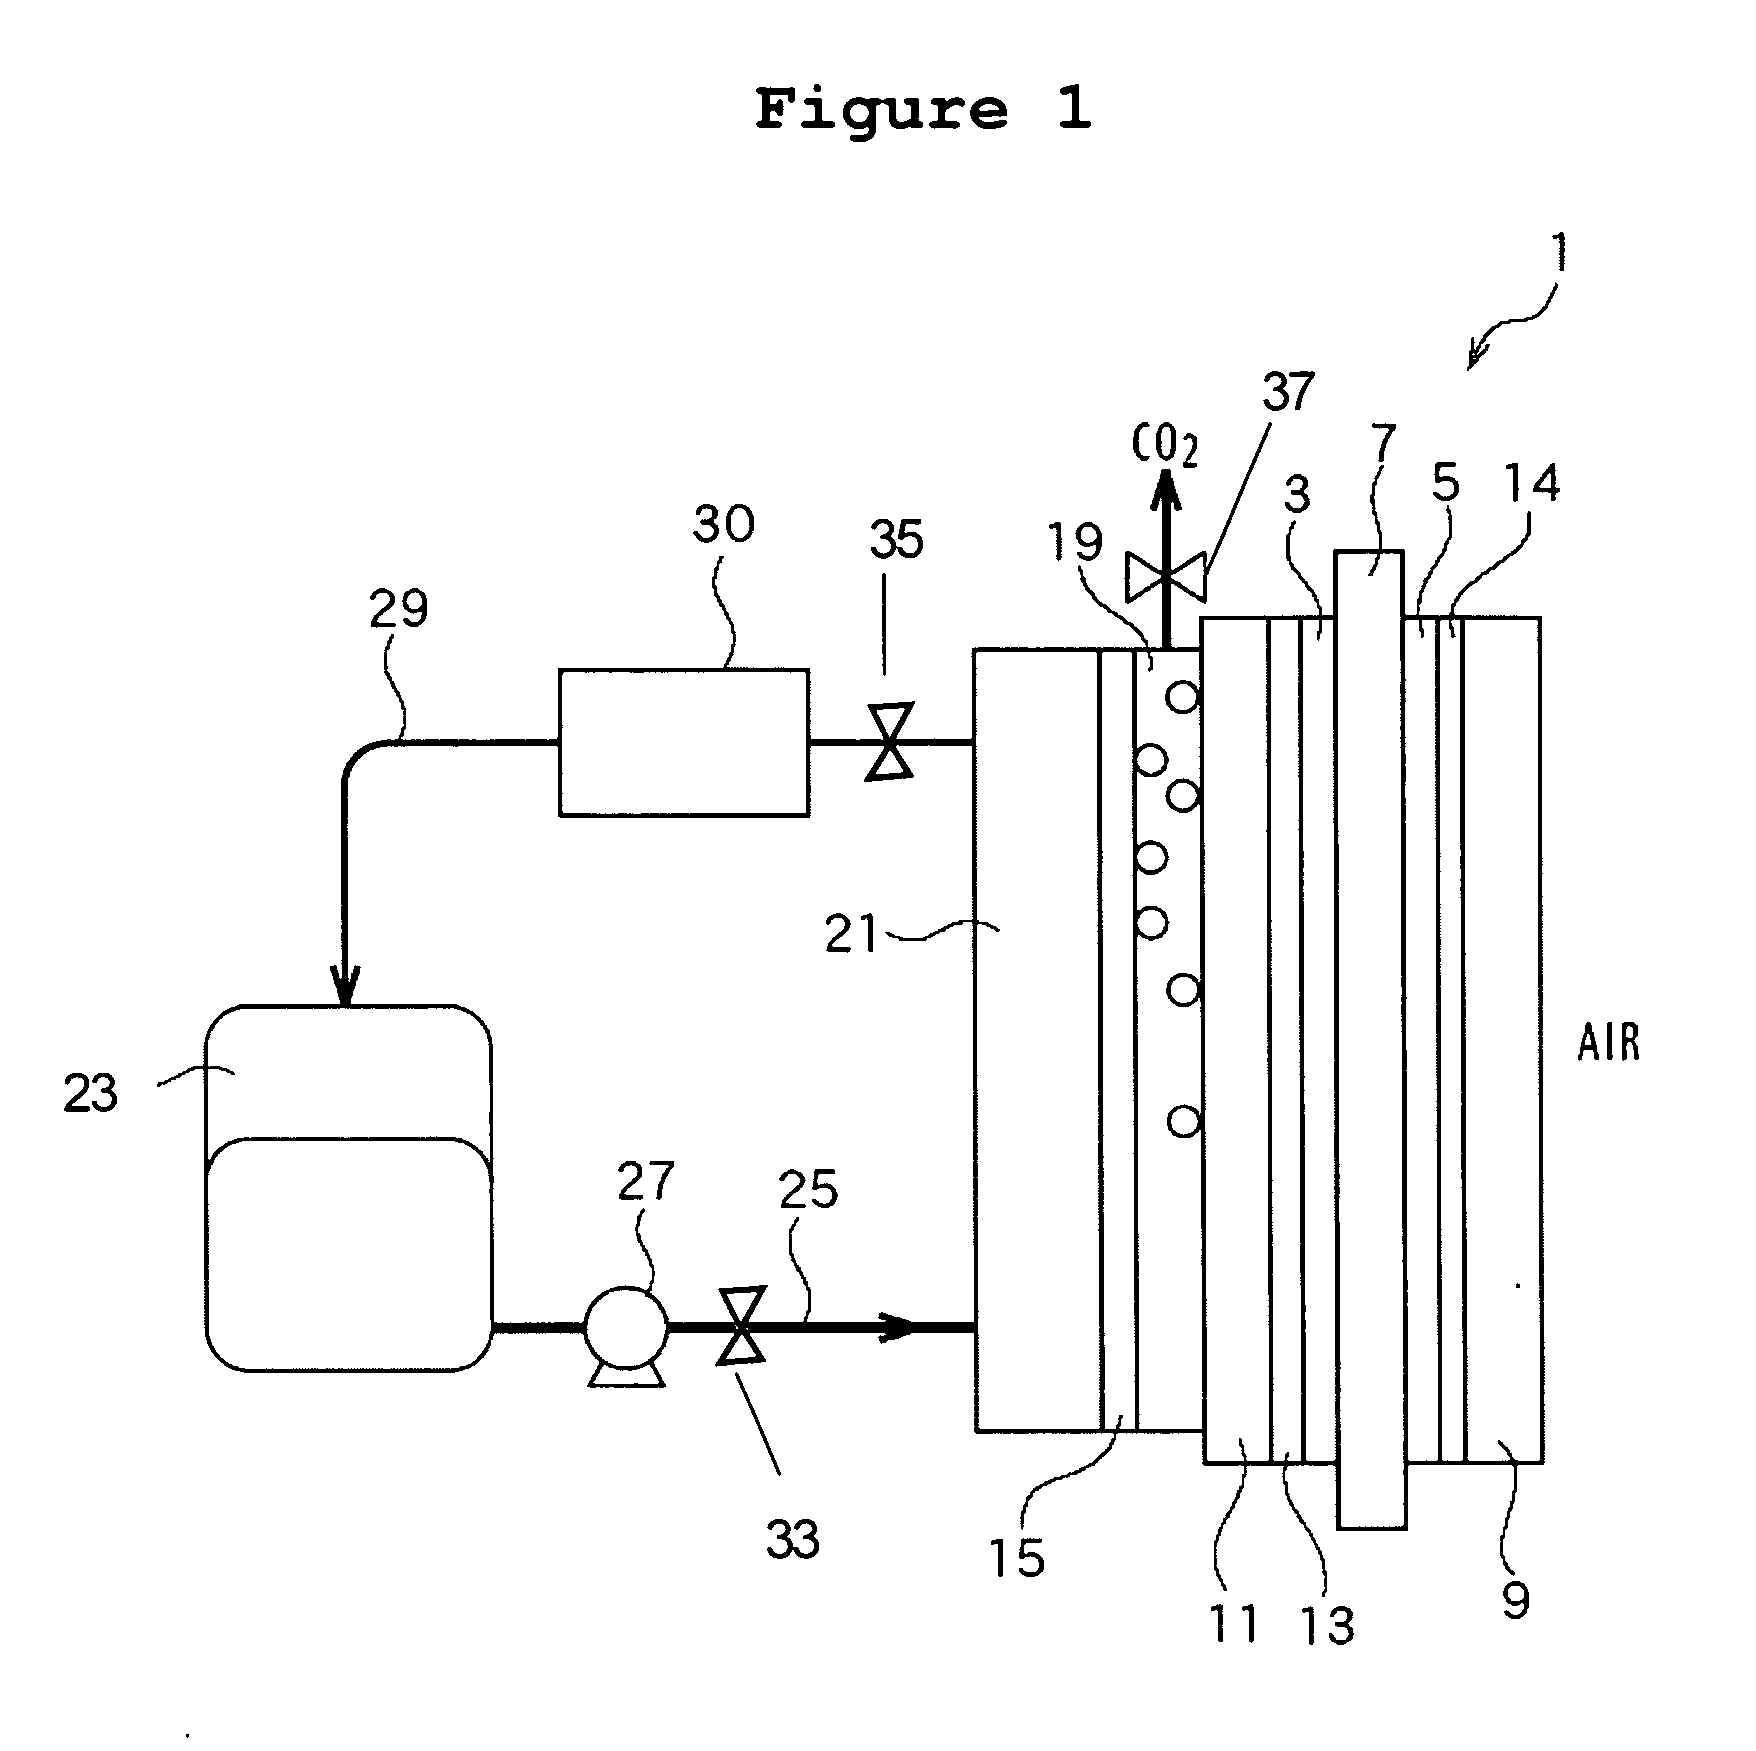 Methods to control water flow and distribution in direct methanol fuel cells